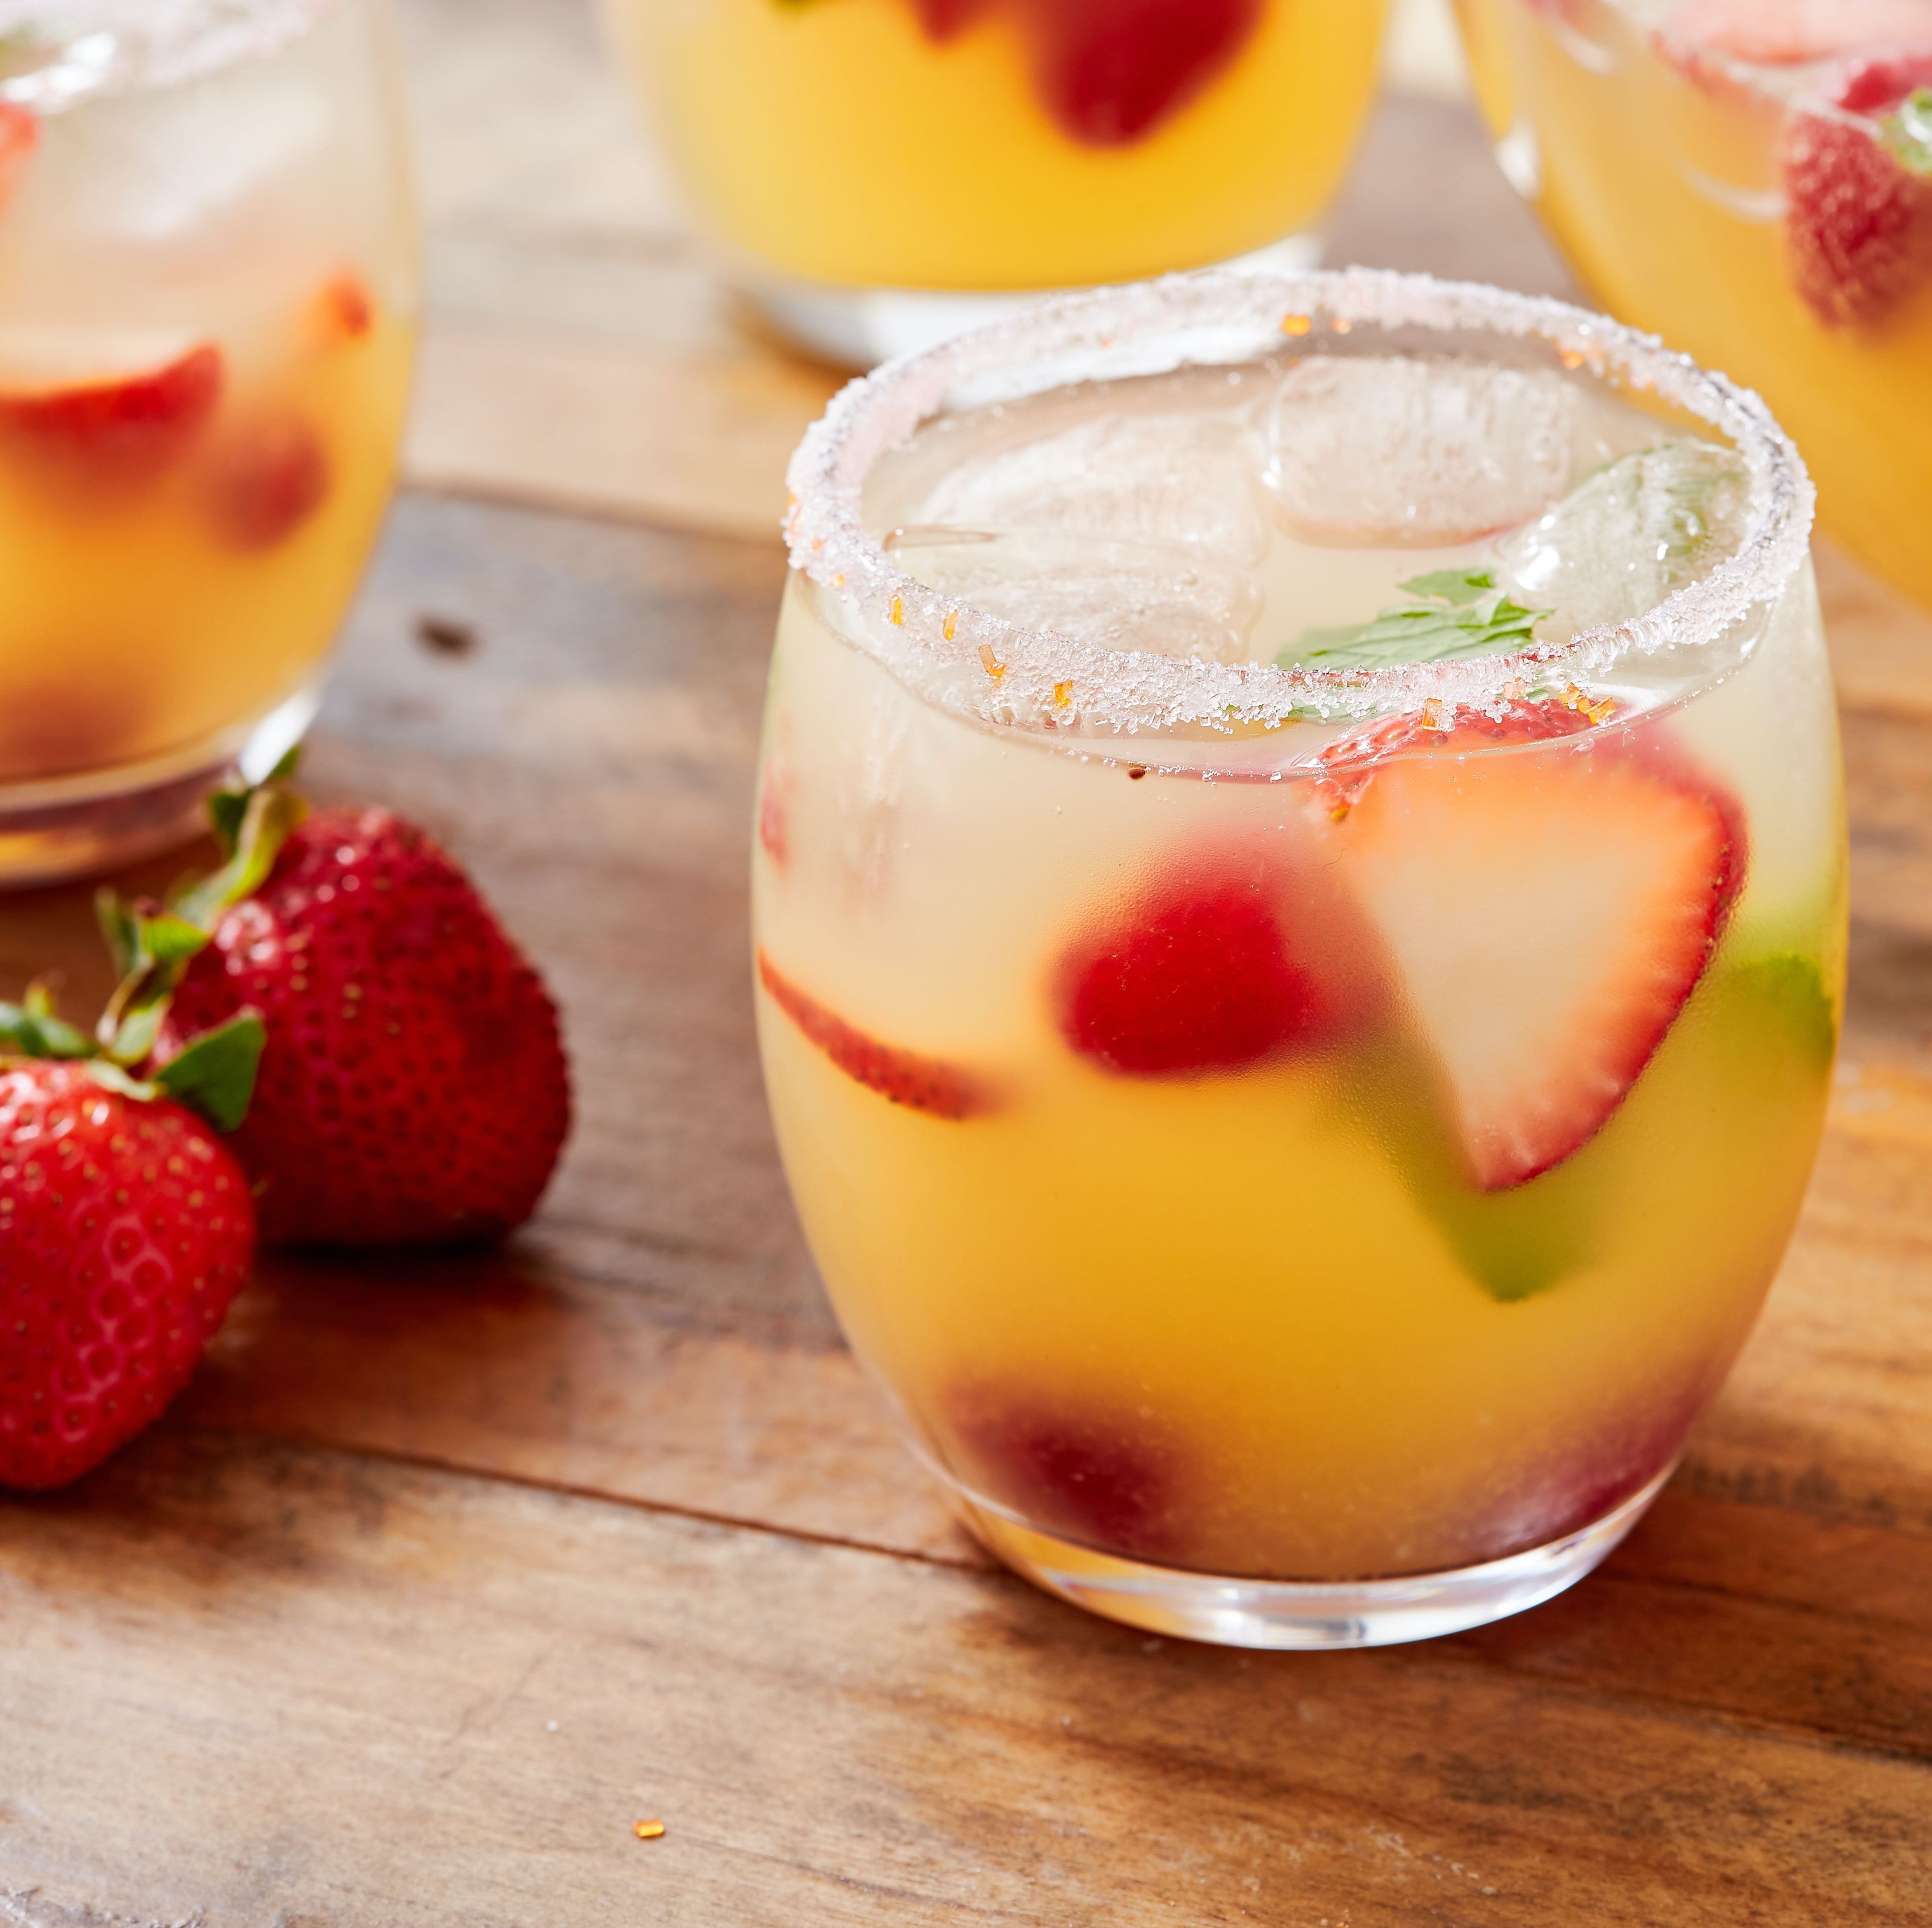 Step Up Your Basic Mimosa With These Creative Brunch Drinks